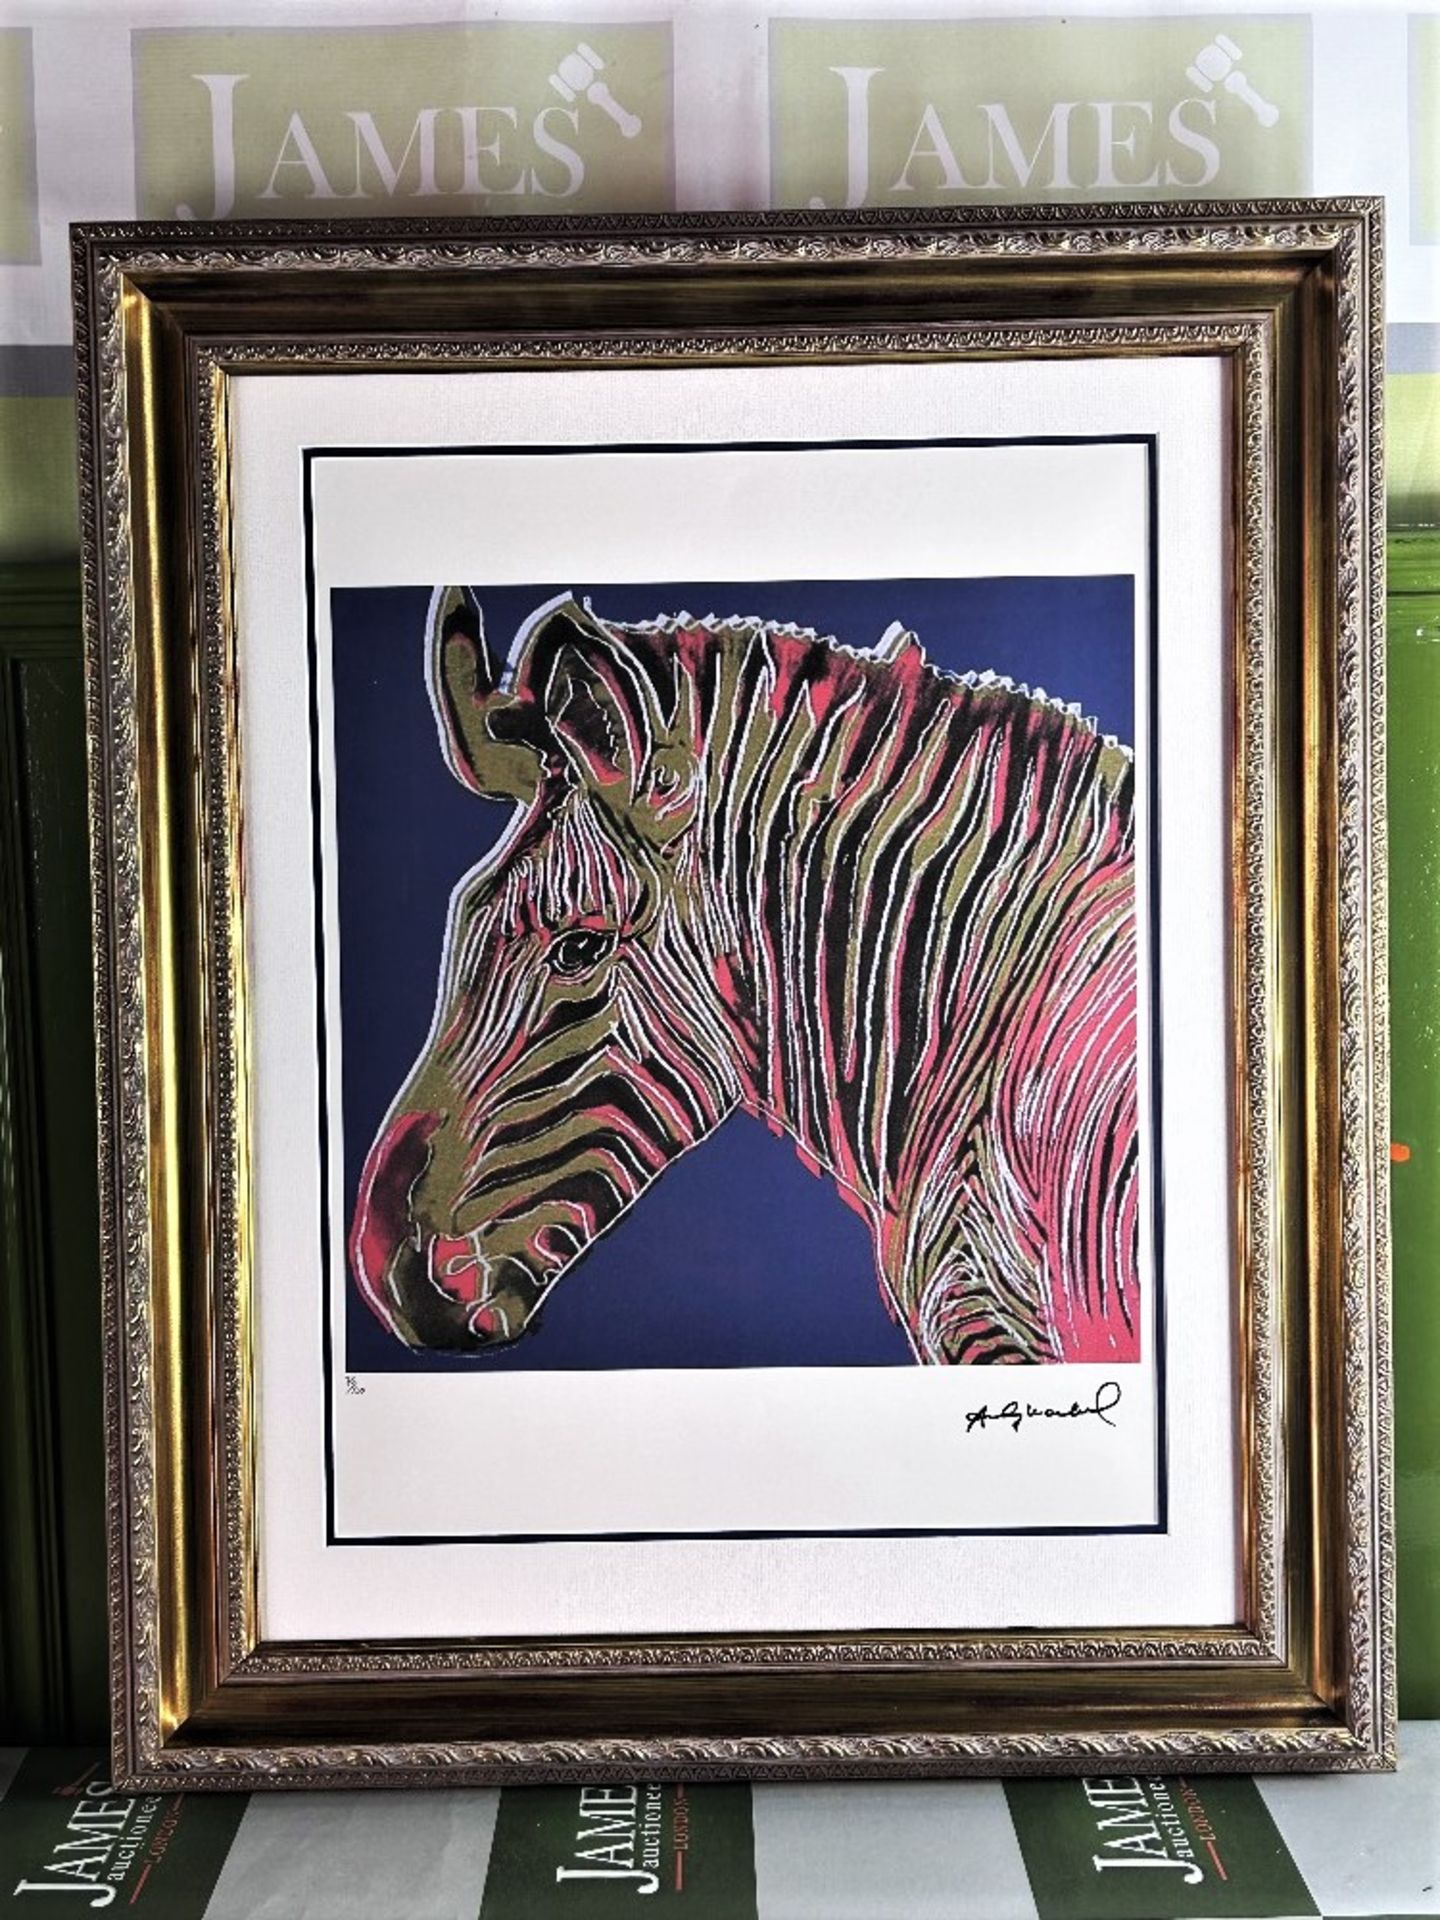 Andy Warhol-(1928-1987) "Endangered Species Zebra" Lithograph - Image 7 of 7